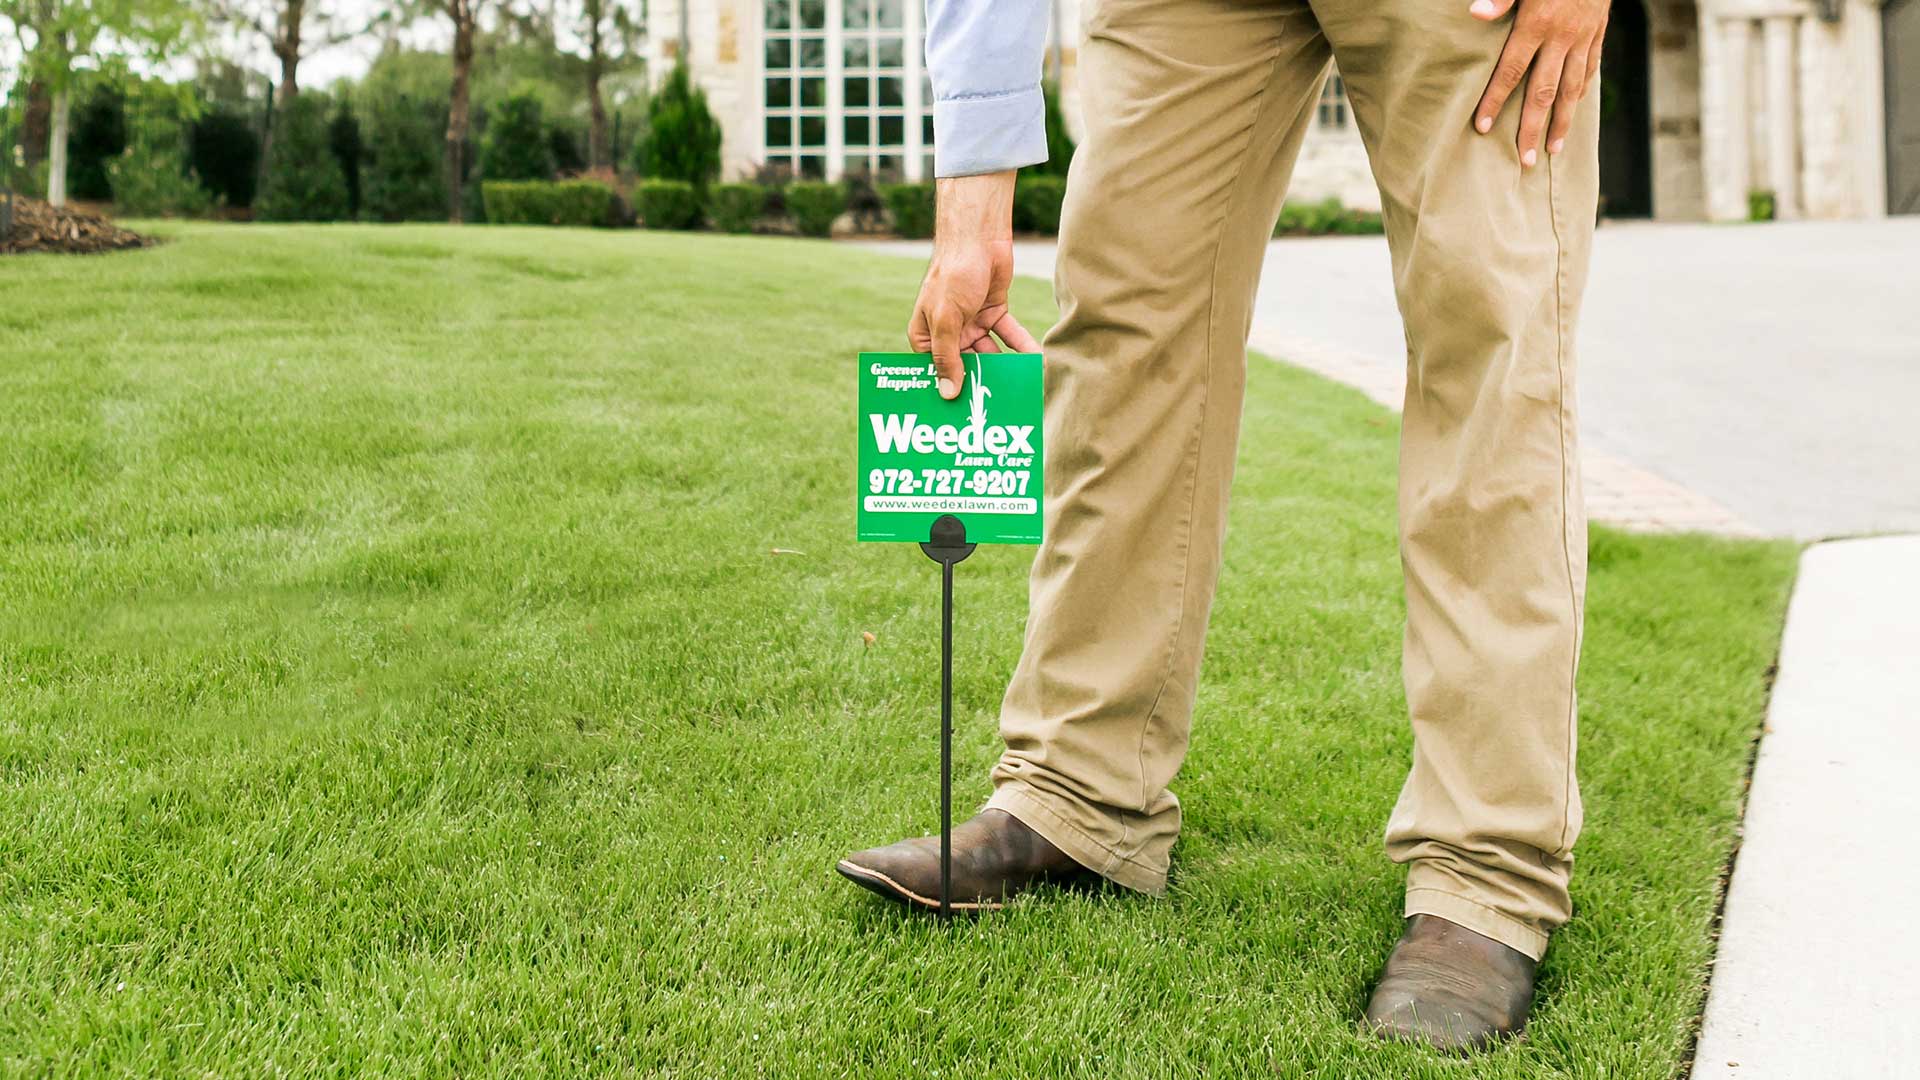 Best Lawn Care Company for Weed Control and Lawn Treatments